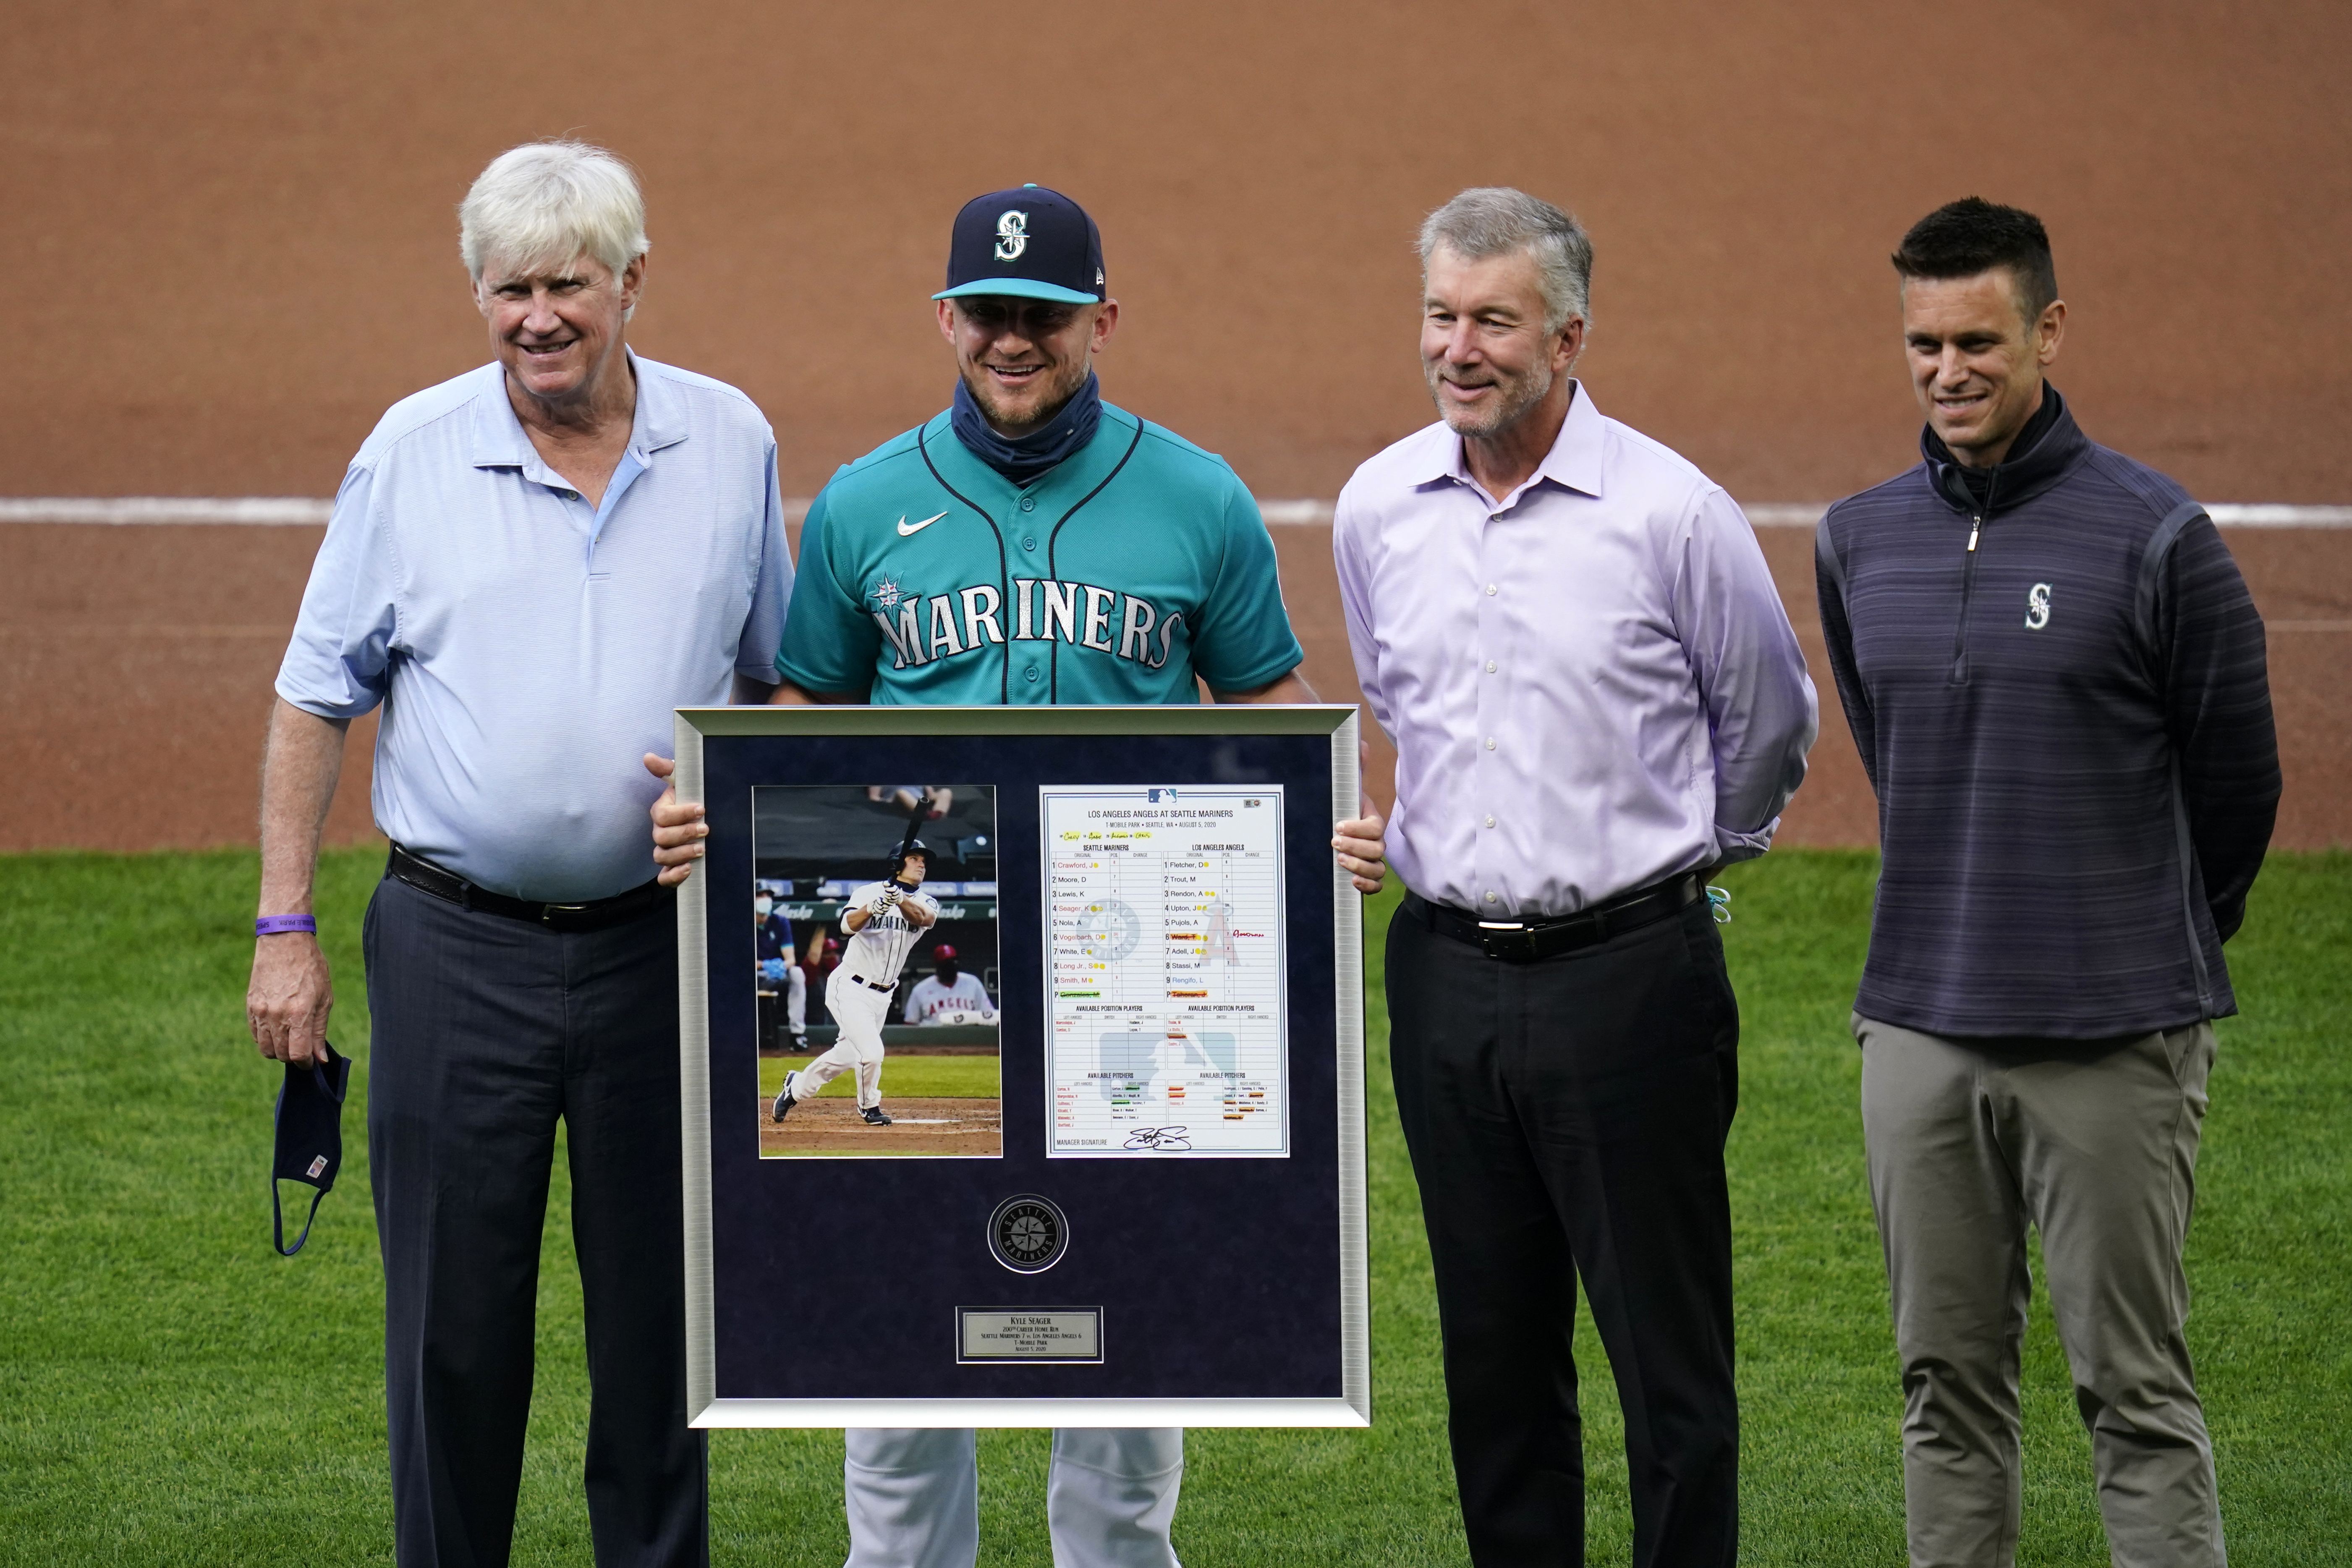 Mariners pay homage to club's history with new City Connect